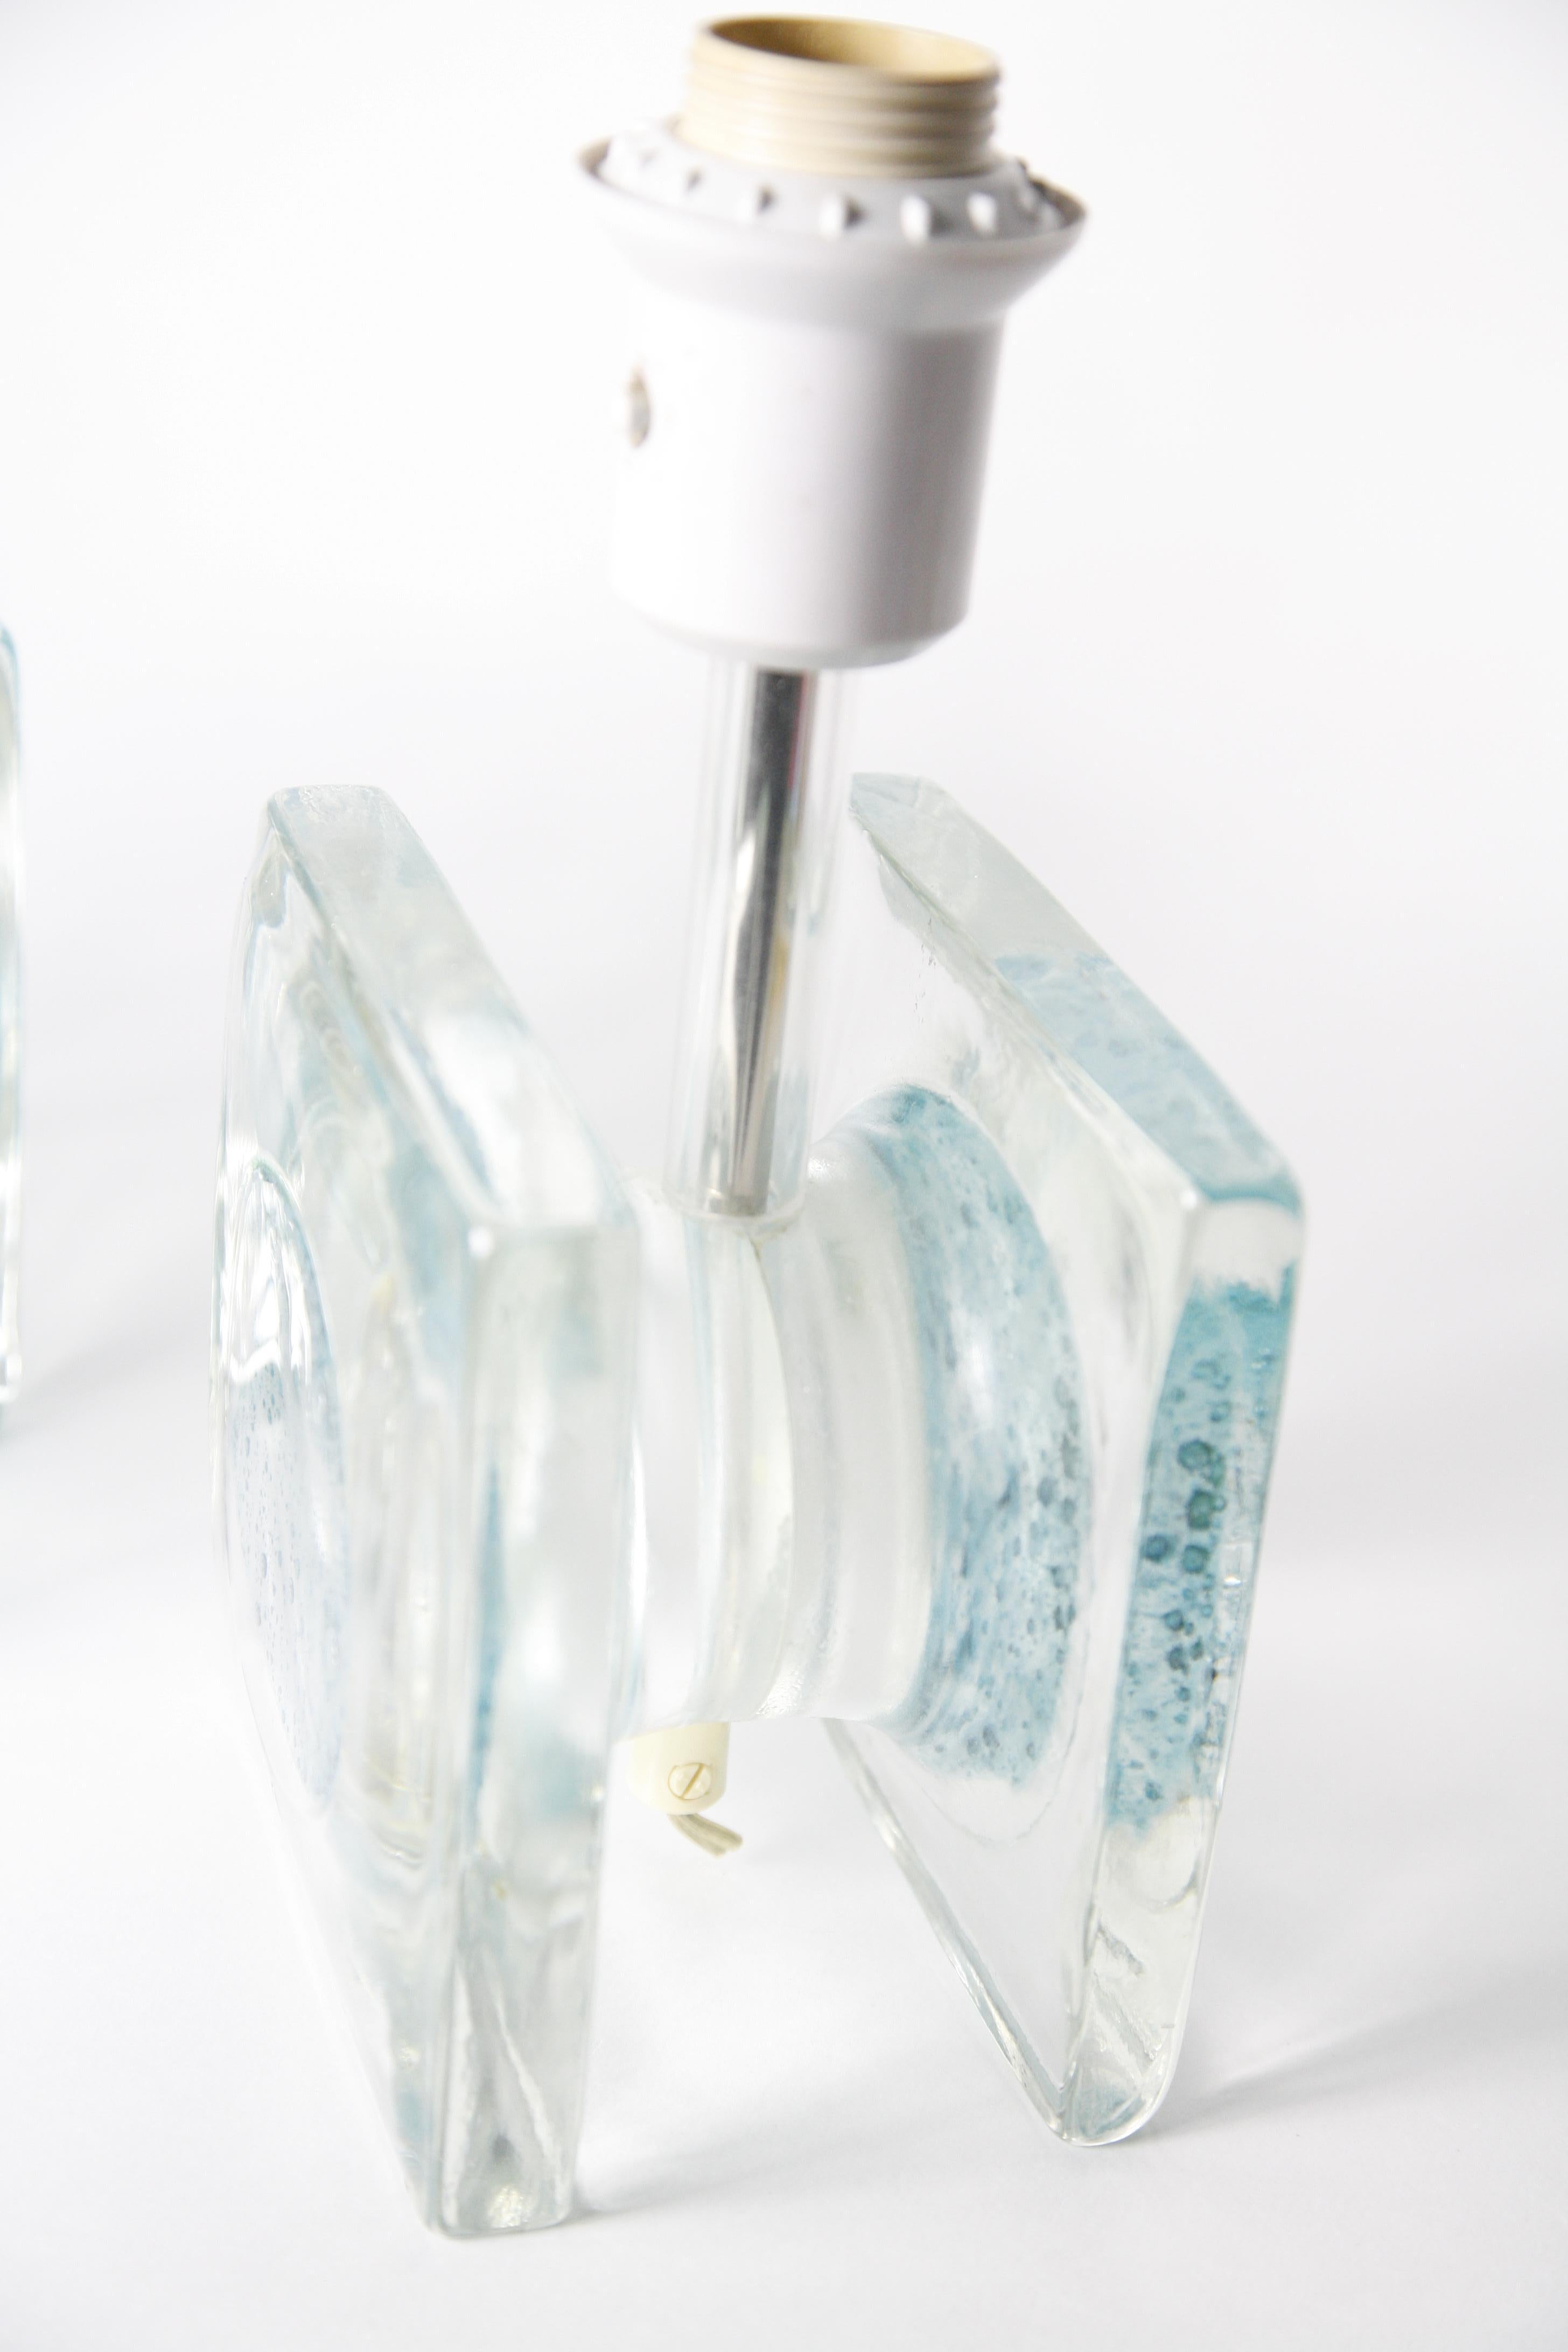 Cast Pair of Clear Aqua Blue/Green Block Glass Table Lamps by Pukeberg, Sweden, 1970